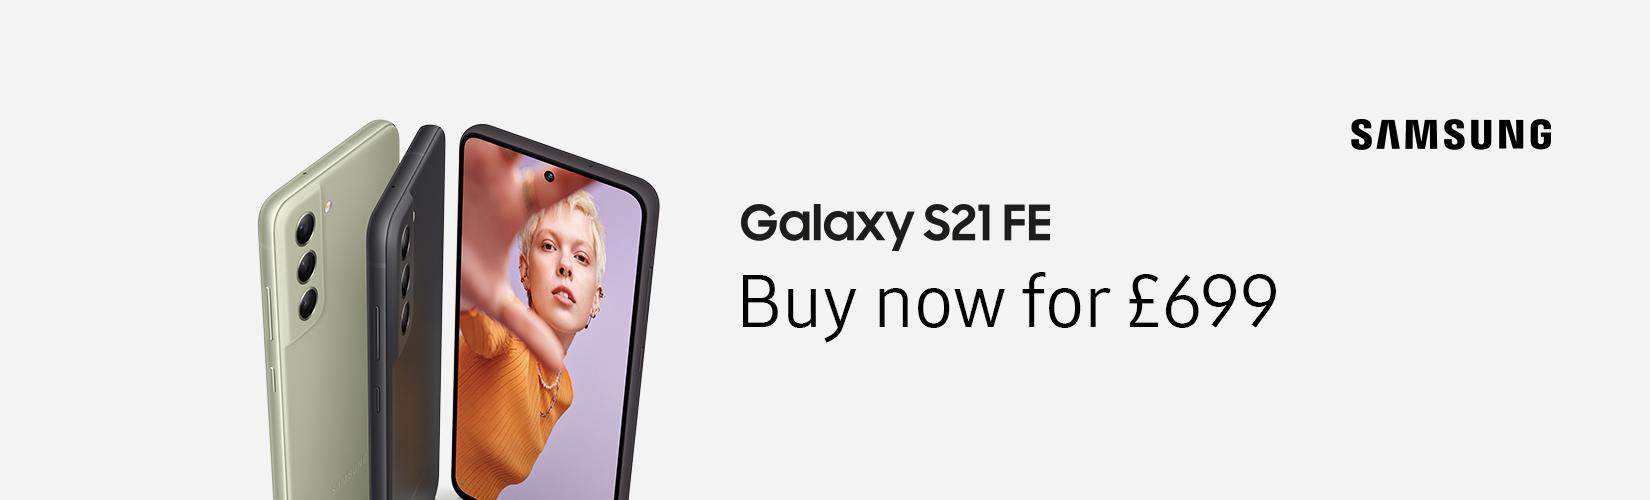 Samsung. Galaxy S21 FE. Buy now for £699.